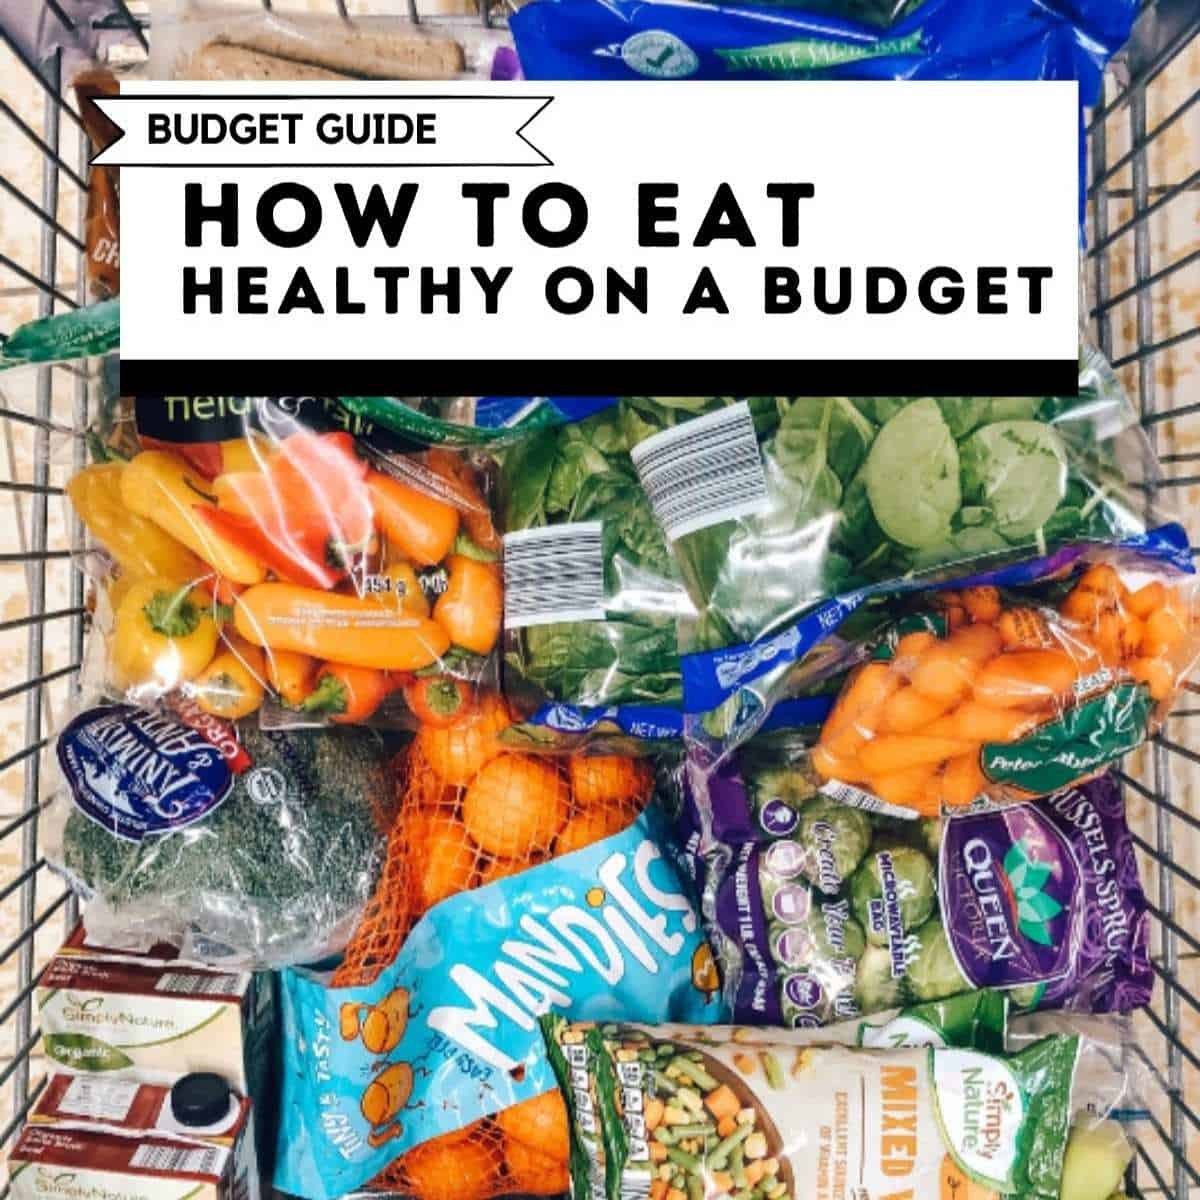 49 Cheapest Food Items That’ll Save Your Grocery Budget